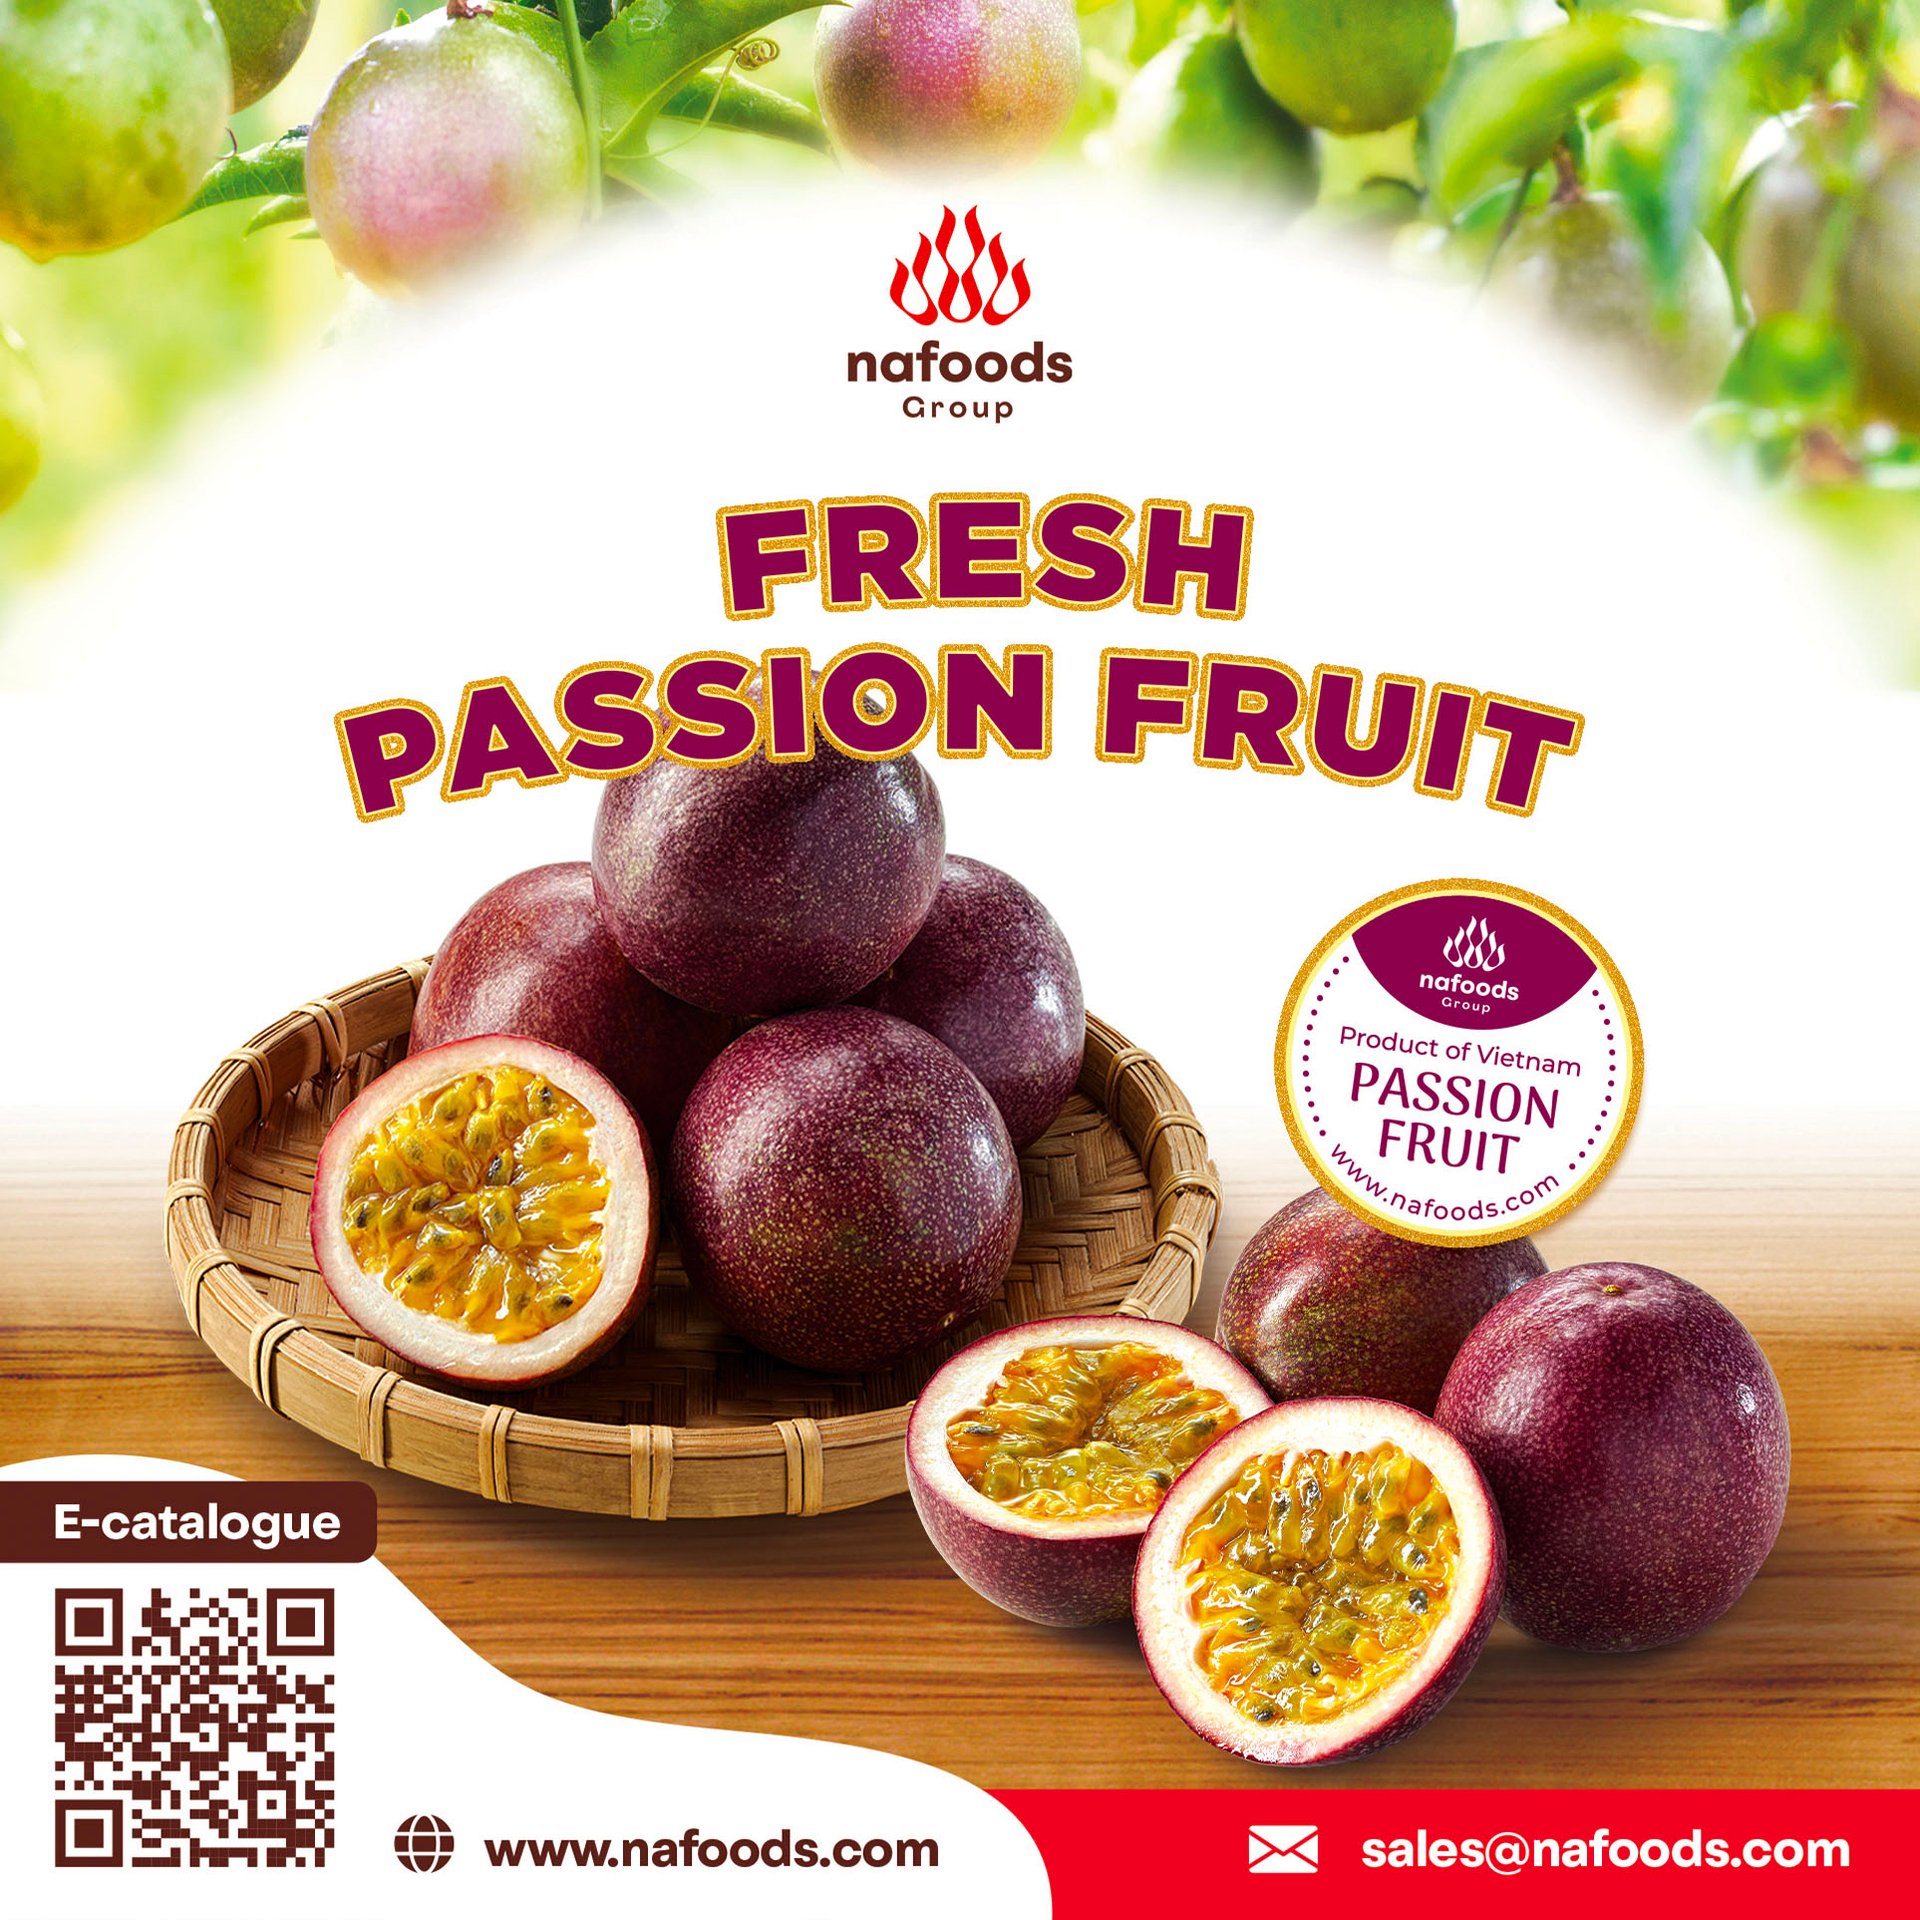 Passion fruit is one of the key products of Nafoods Group.